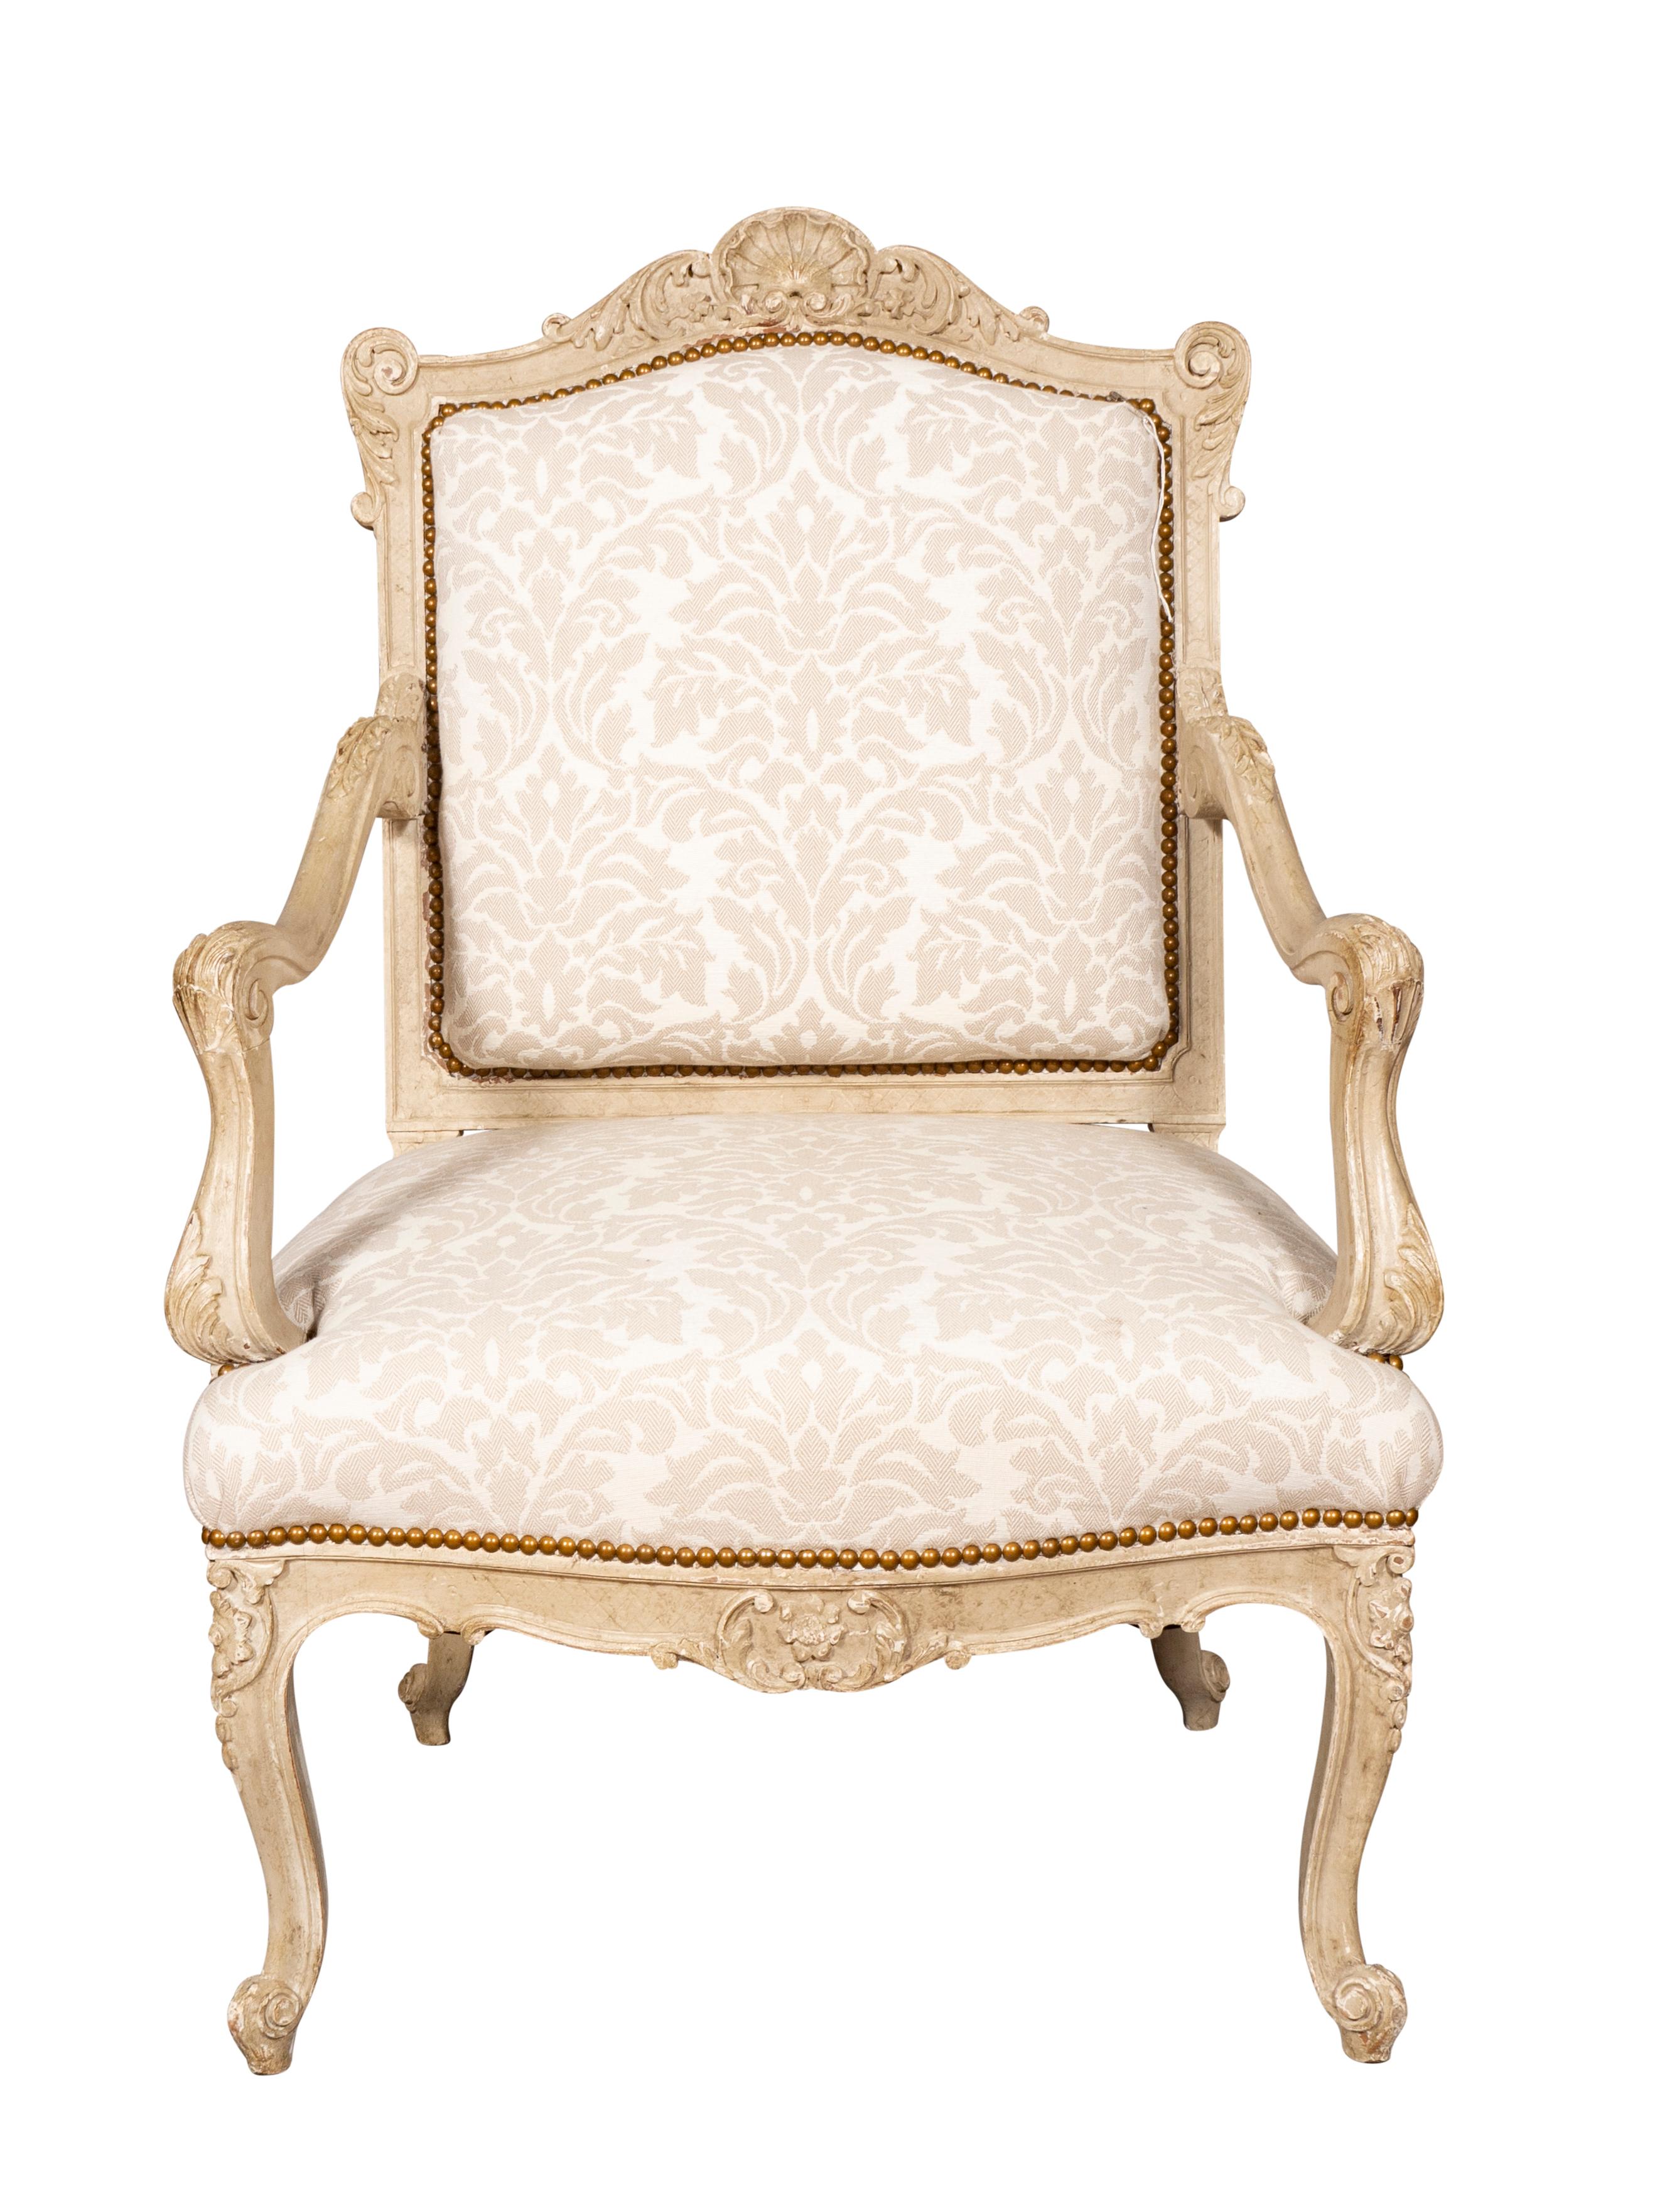 In the rococo style nicely carved with good scale and presence. Upholstery almost perfect.